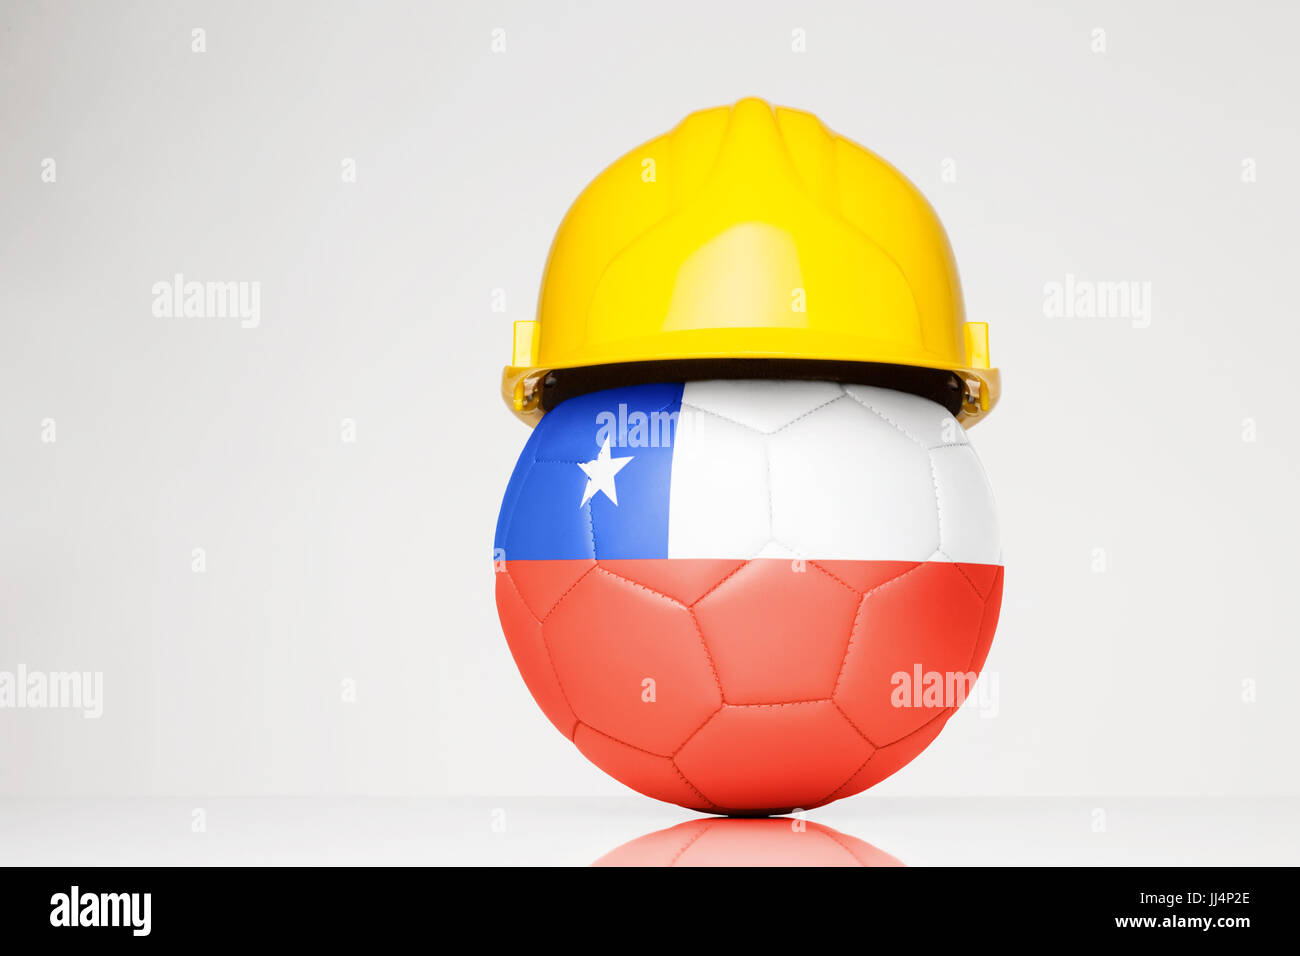 football wearing a hard hat with the Chile flag superimposed on the football Stock Photo